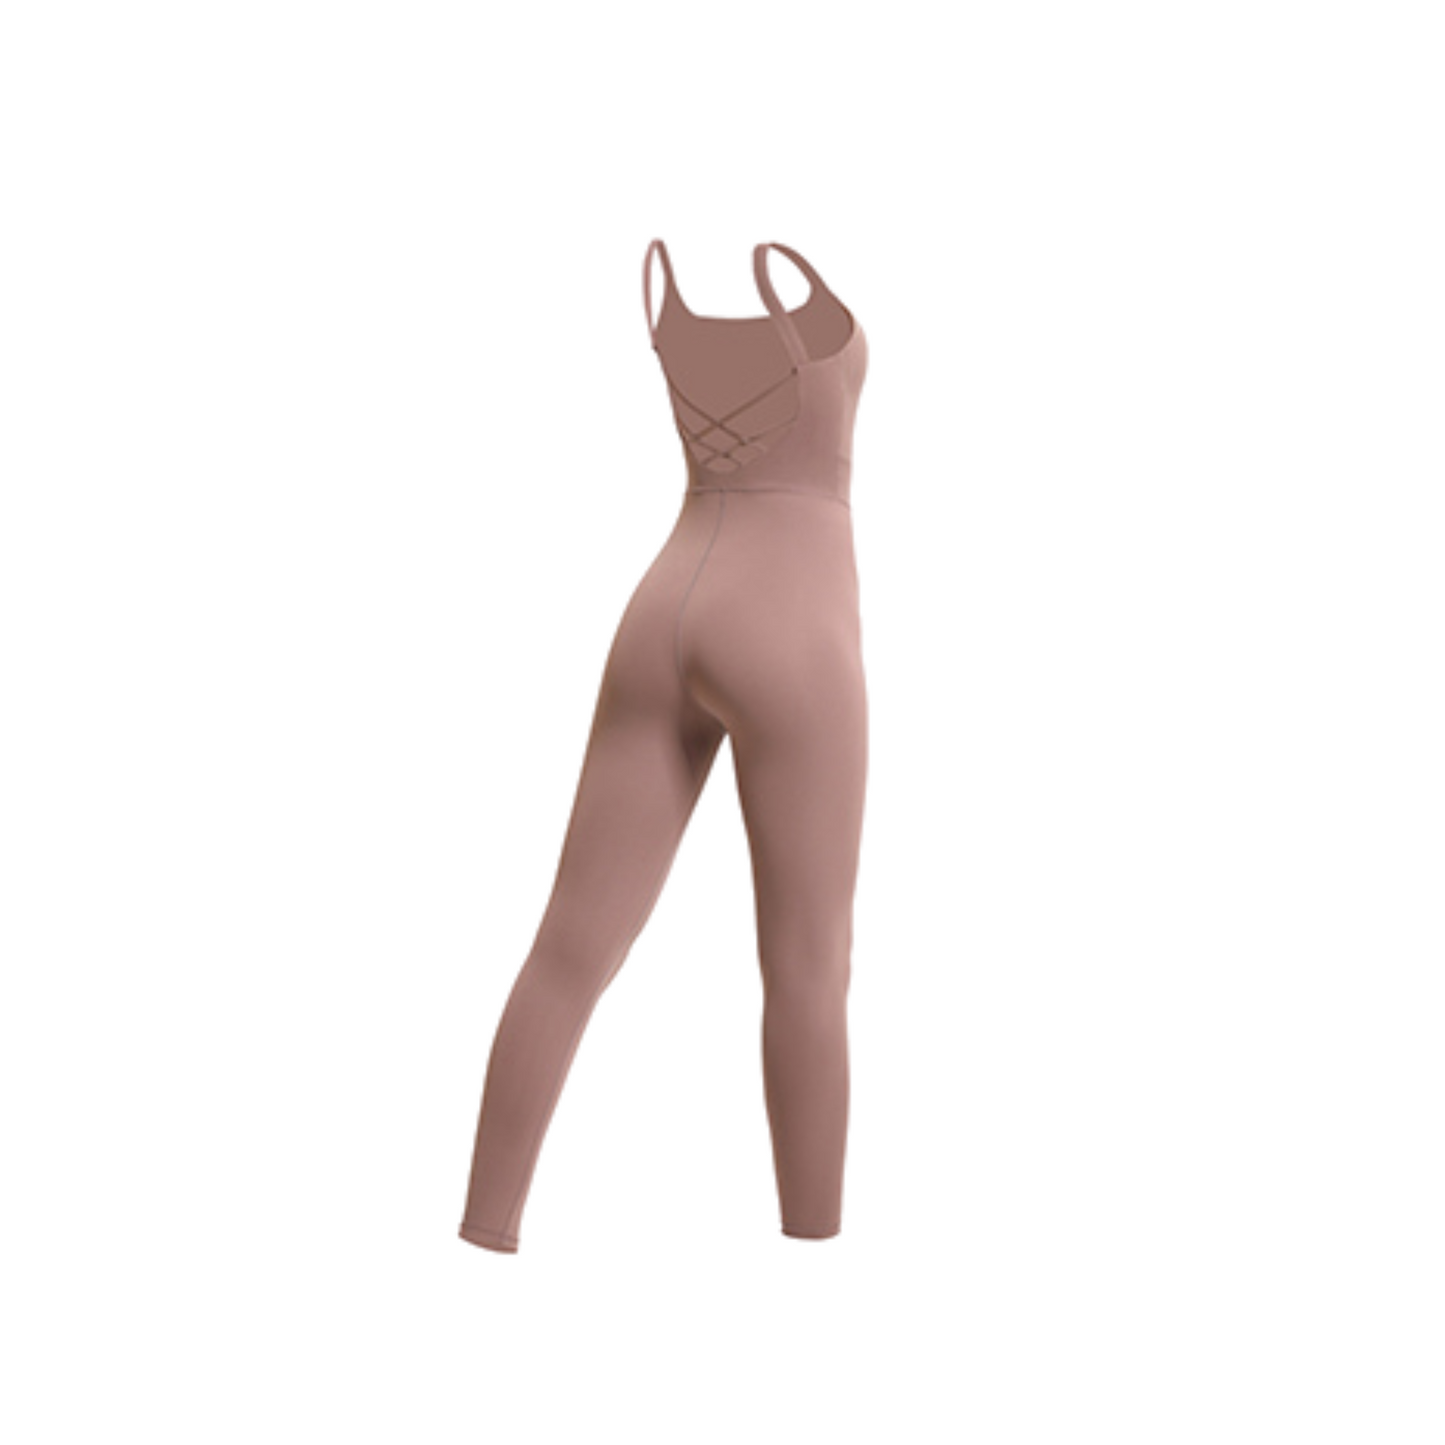 3D TECHNICAL FLAT DRAWING  OF A MAUVE JUMPSUIT FROM VIBRAS ACTIVEWEAR.